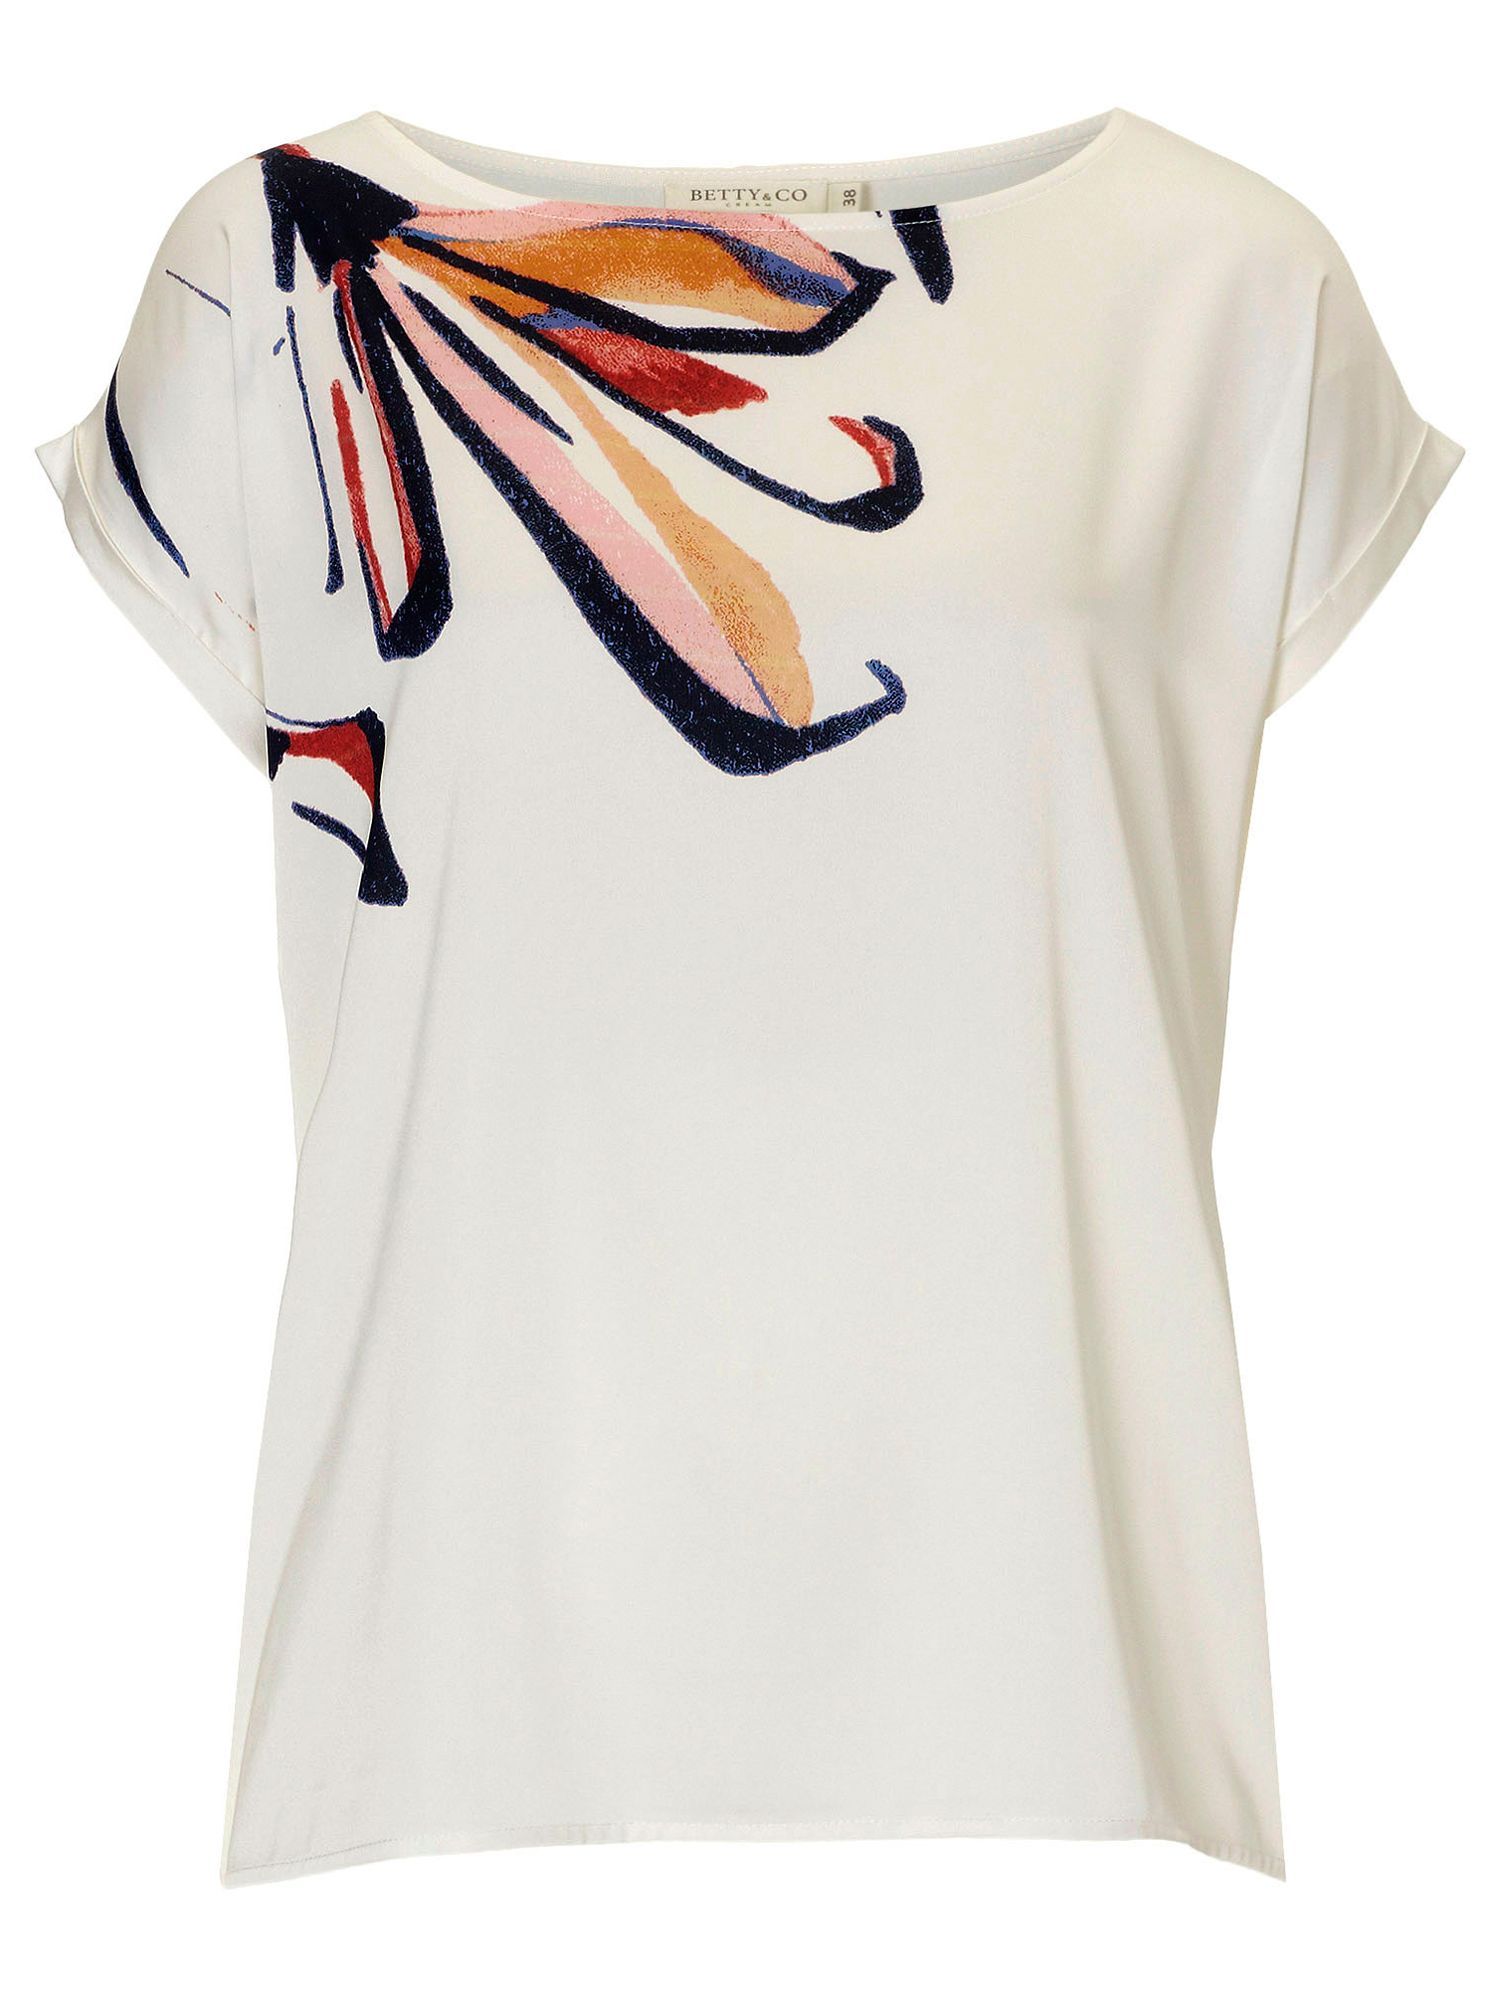 Betty & Co. Oversized Print Top, Cream / Red at John Lewis & Partners